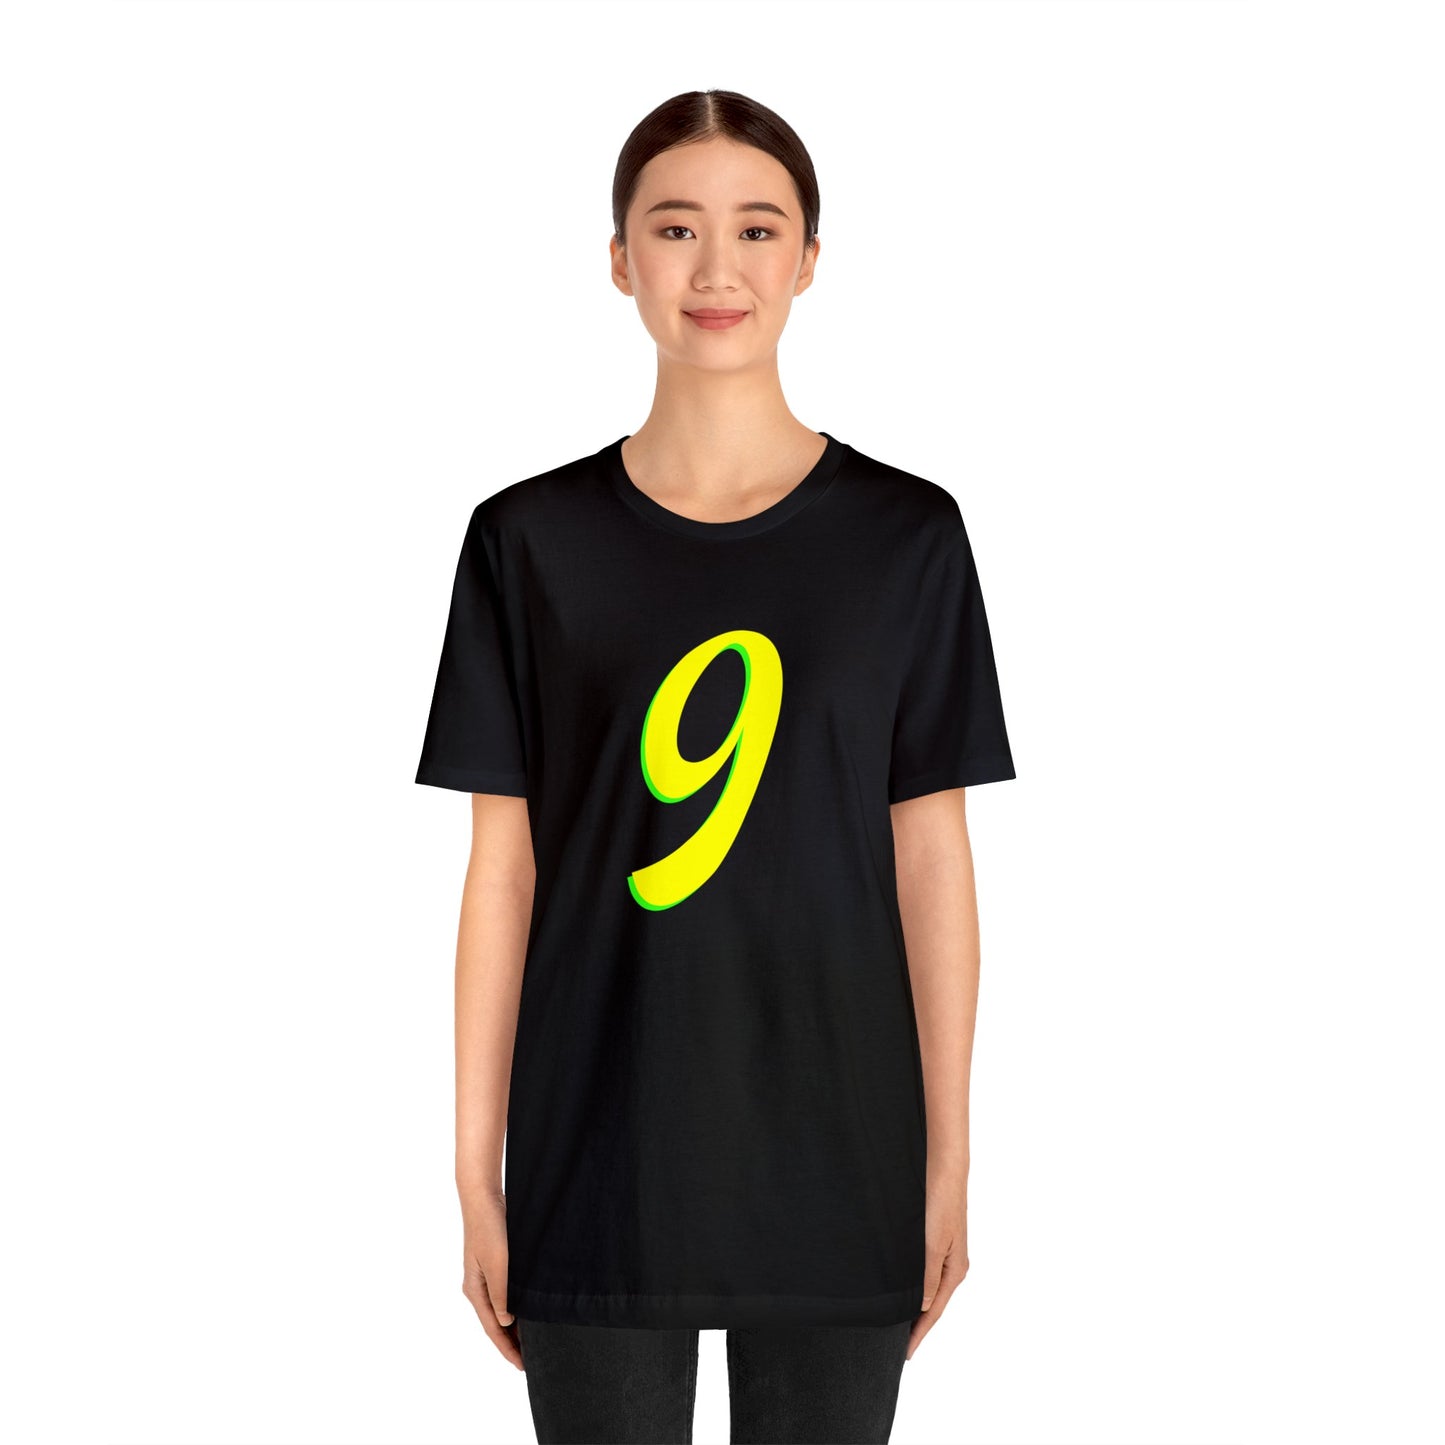 Number 9 Design - Soft Cotton Tee for birthdays and celebrations, Gift for friends and family, Multiple Options by clothezy.com in Black Size Medium - Buy Now